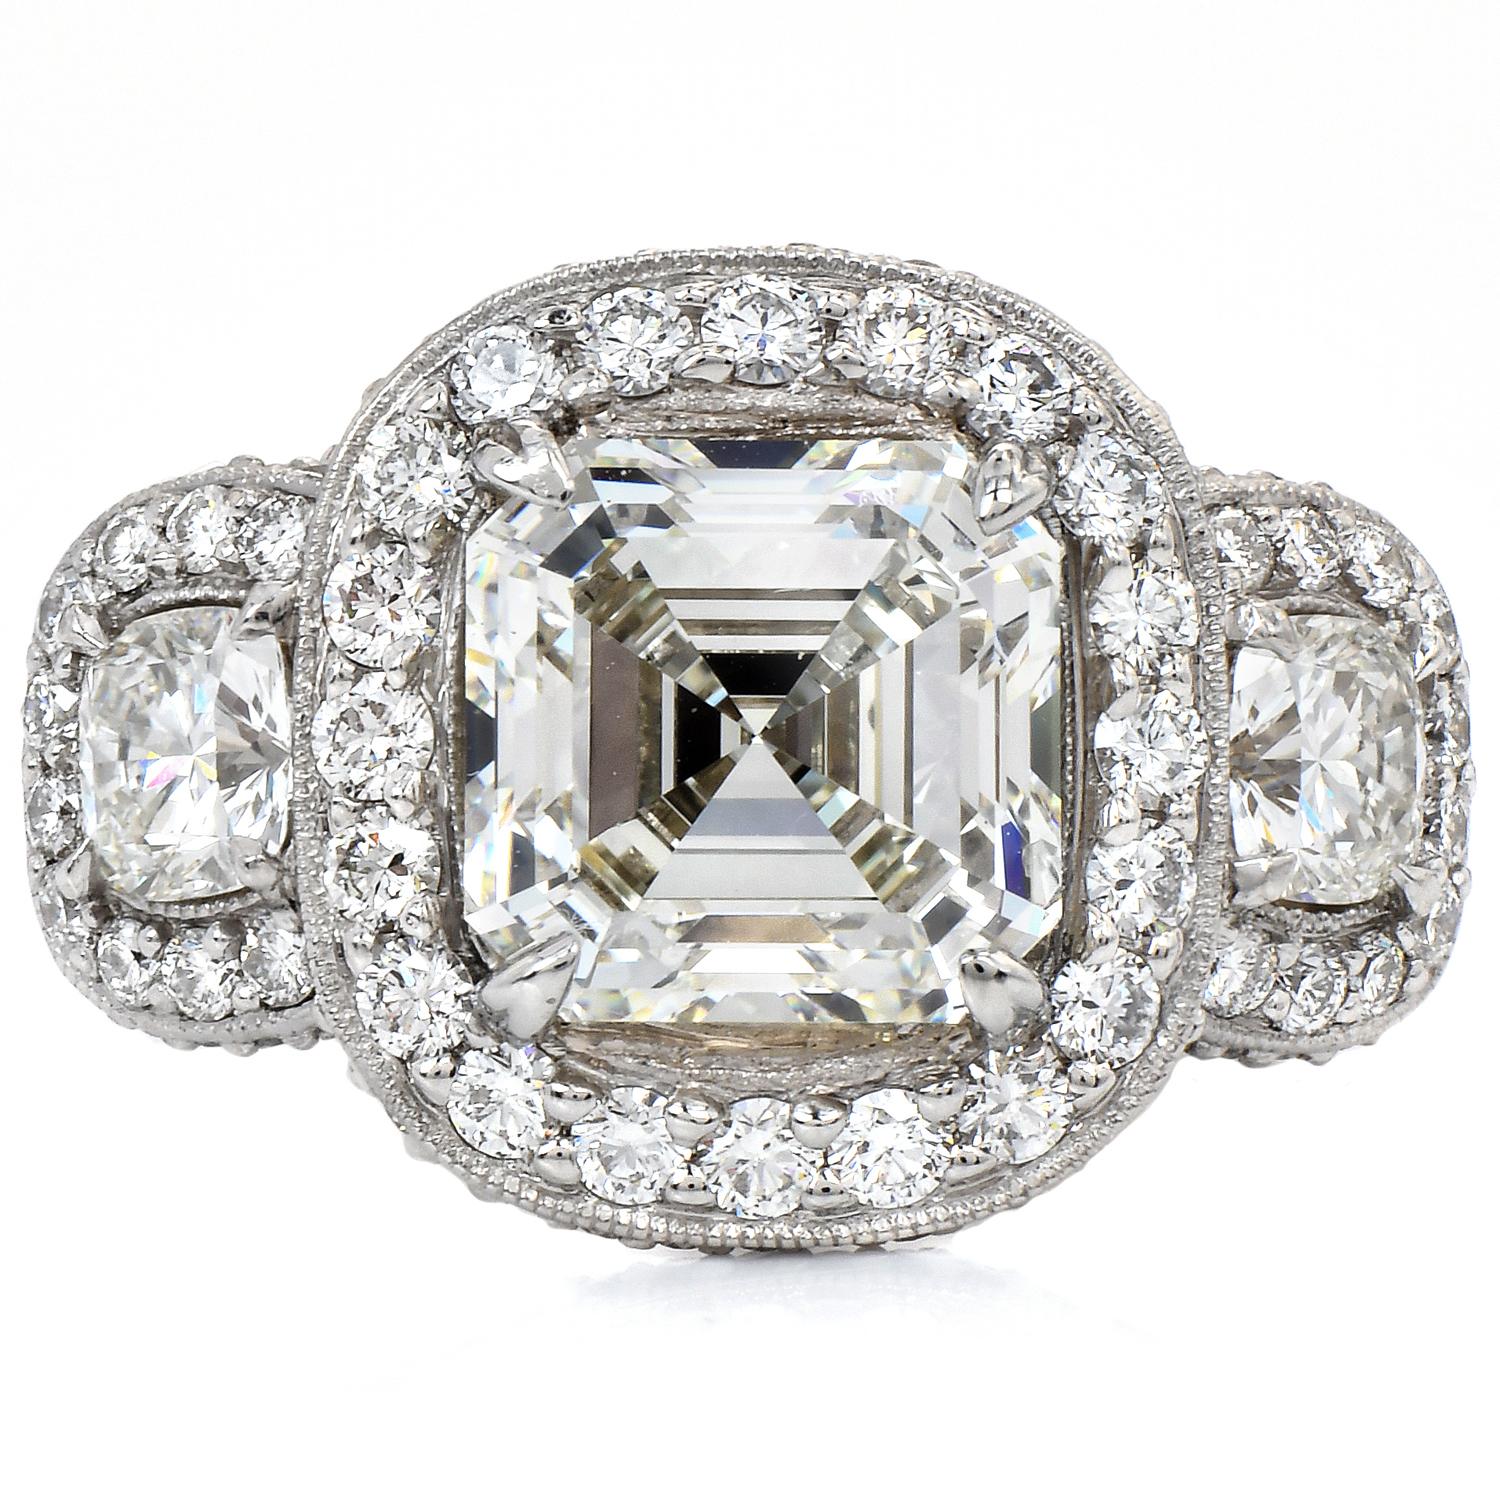 Experience top elegance and luxury, with this GIA Certified 5.49ct Diamond Platinum Halo Triple Stone Ring.

This exquisite diamond ring is a true masterpiece that captivates with its sparkle and unparalleled craftsmanship. Certified by GIA with